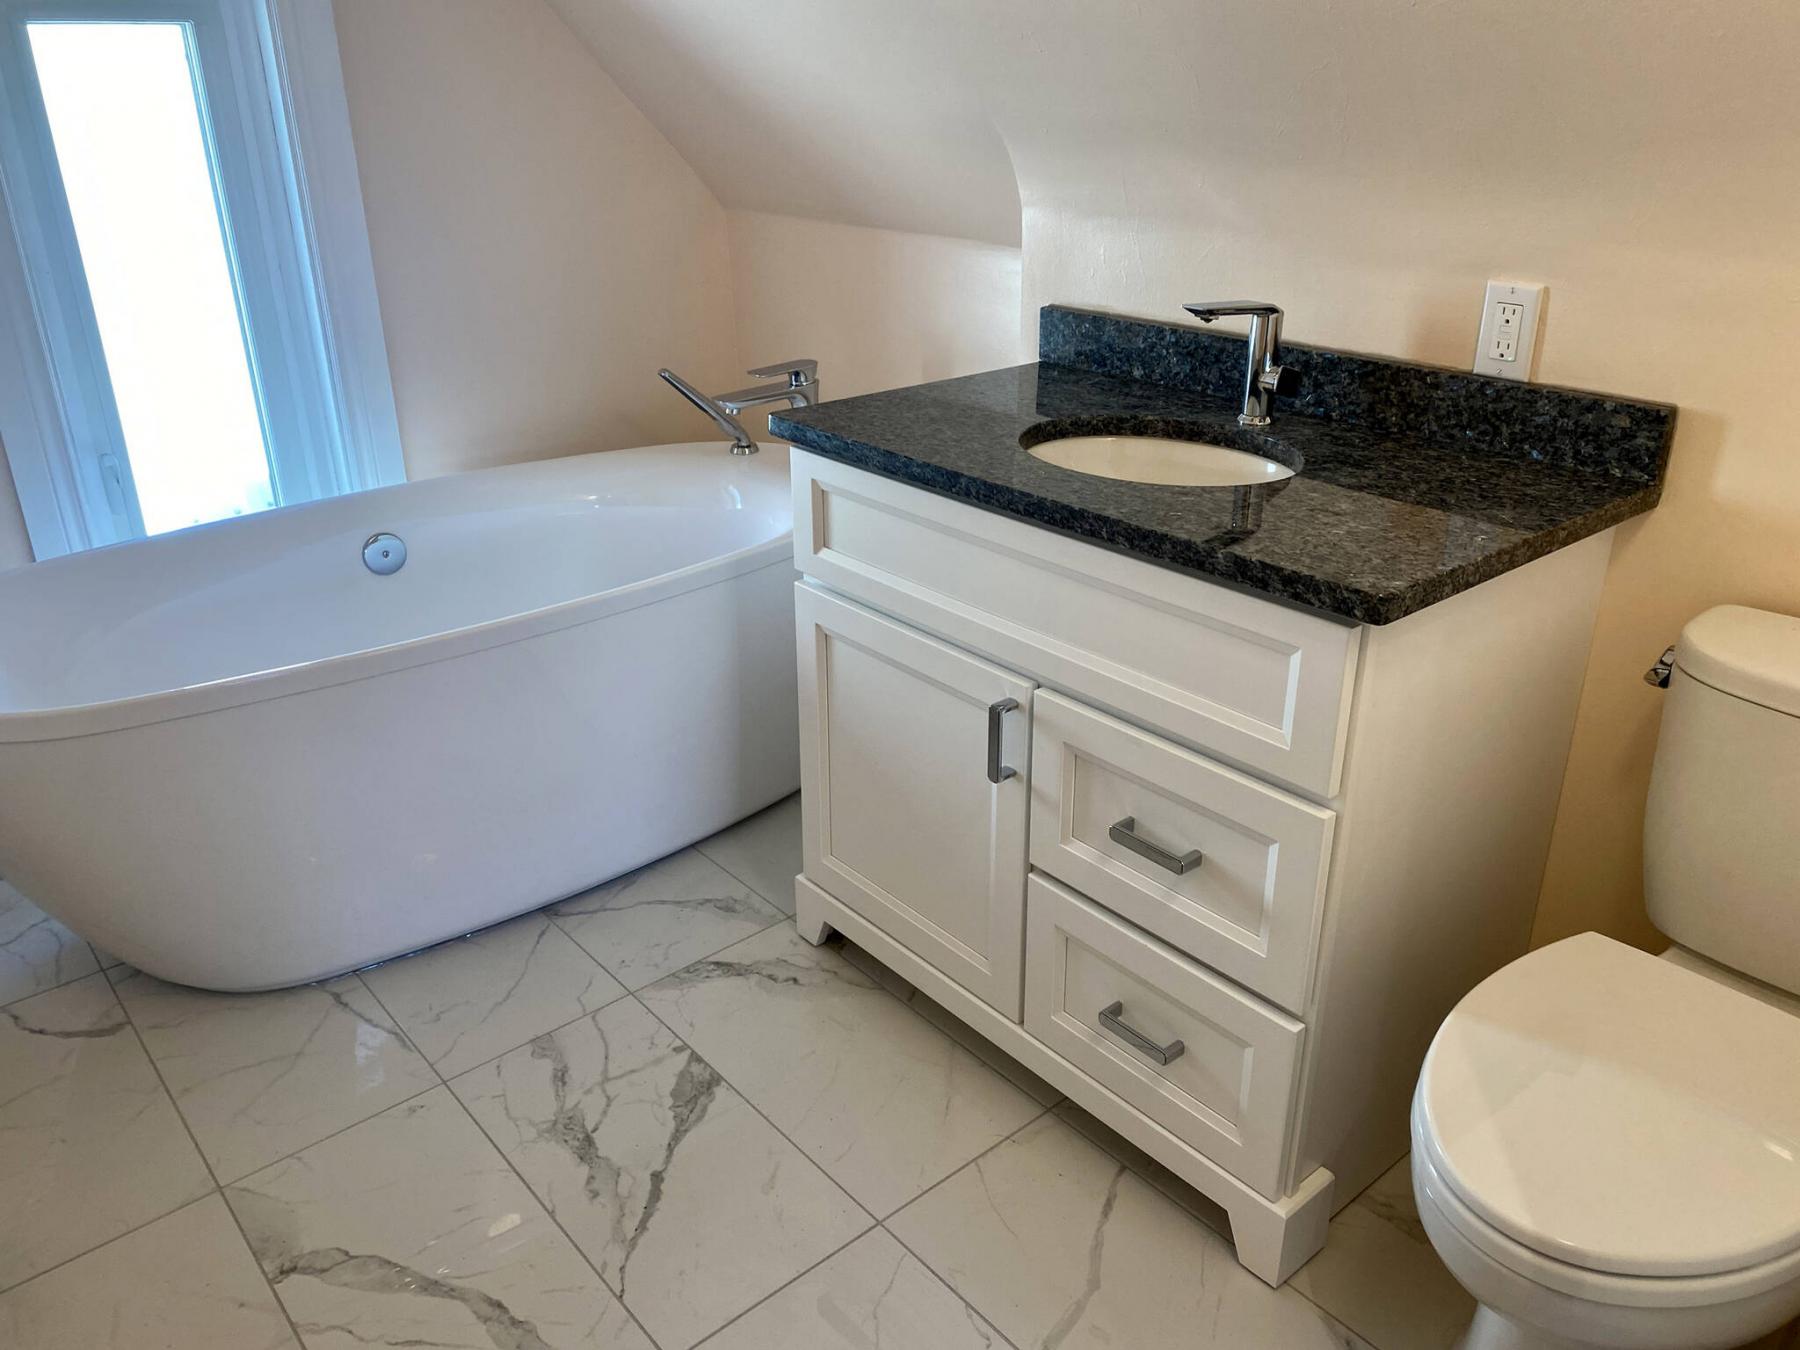 <p>Photos by Marc LaBossiere / Winnipeg Free Press</p><p>The stand-alone tub parallel to the back wall allows for a wider sink and vanity.</p>